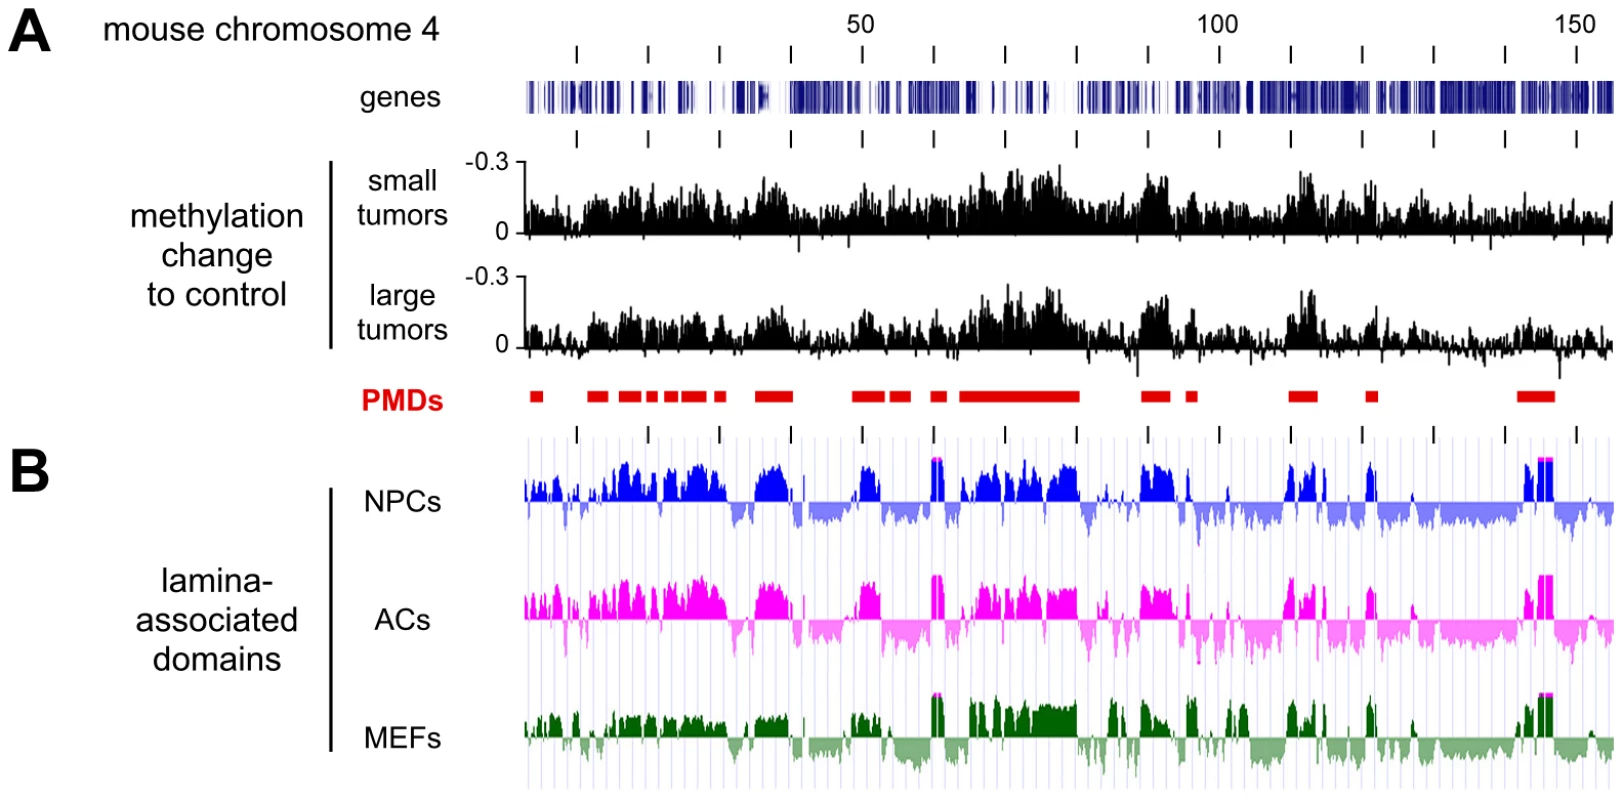 Characterization of hypomethylated domains in Dnmt3a<sup>wt</sup> tumors.